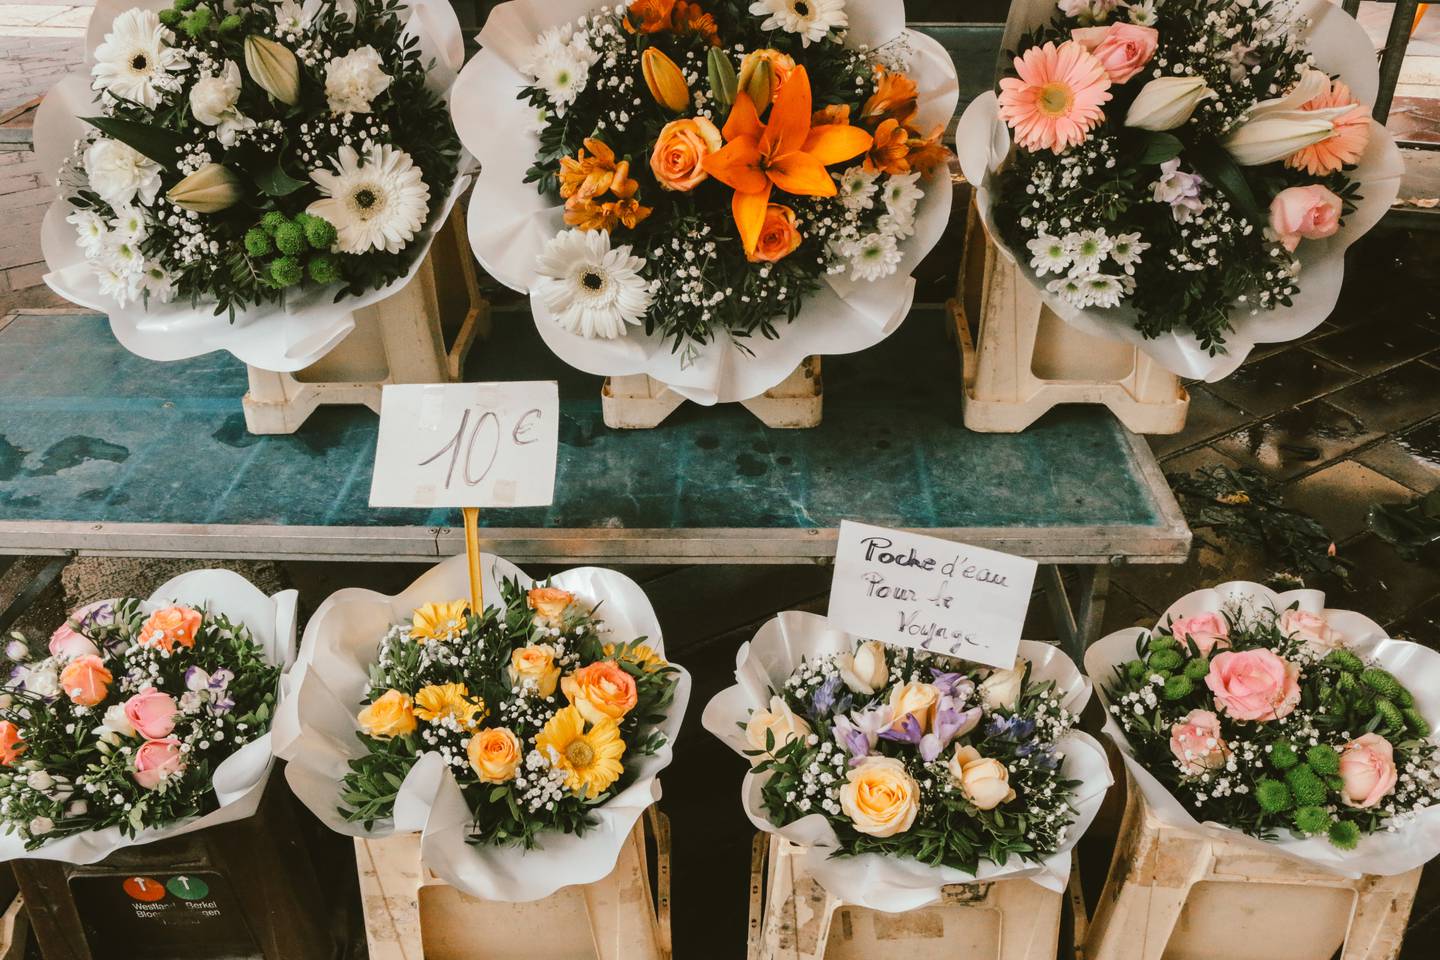 Early risers can explore Nice's flower market, which has been around for over 100 years.  Photo: Kylie Pazz/Unsplash